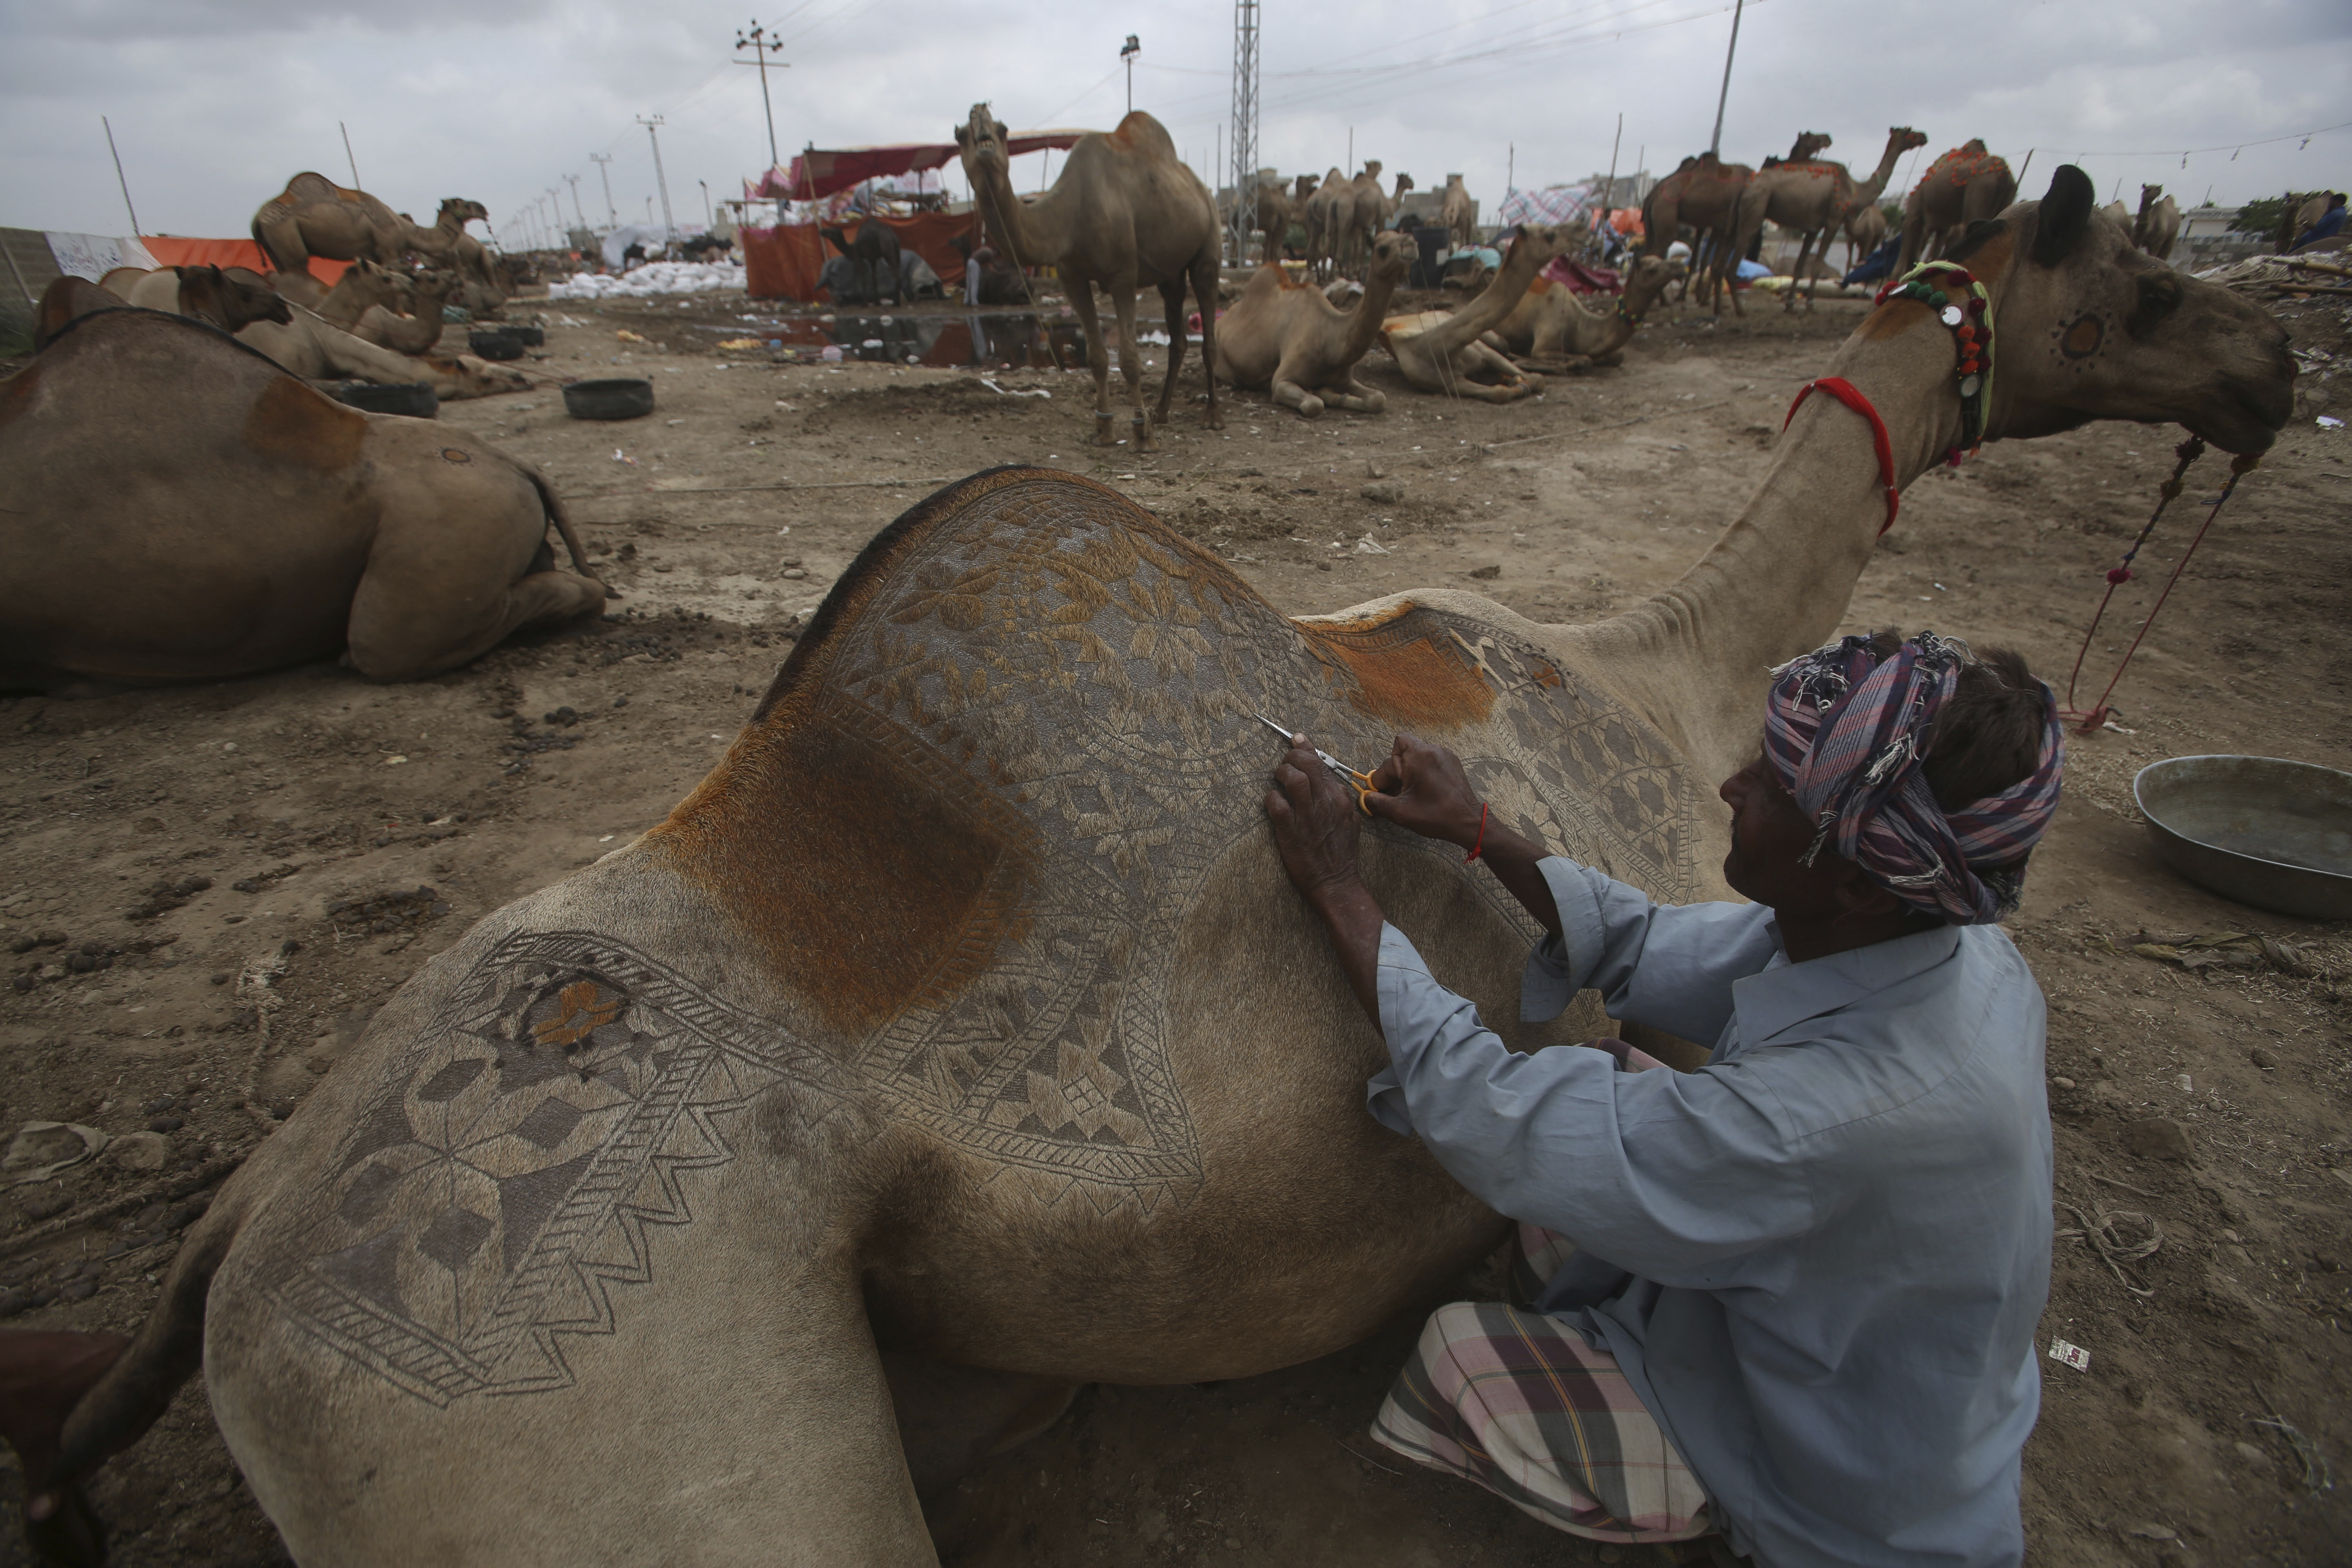 A Pakistani vendor makes a design on a camel to attract customers at a cattle market set up for the upcoming Muslims' festival Eid al-Adha in Karachi, Pakistan, Friday, Aug. 25, 2017. Eid al-Adha, or Feast of Sacrifice, most important Islamic holiday marks the willingness of the Prophet Ibrahim (Abraham to Christians and Jews) to sacrifice his son. (AP Photo/Fareed Khan)